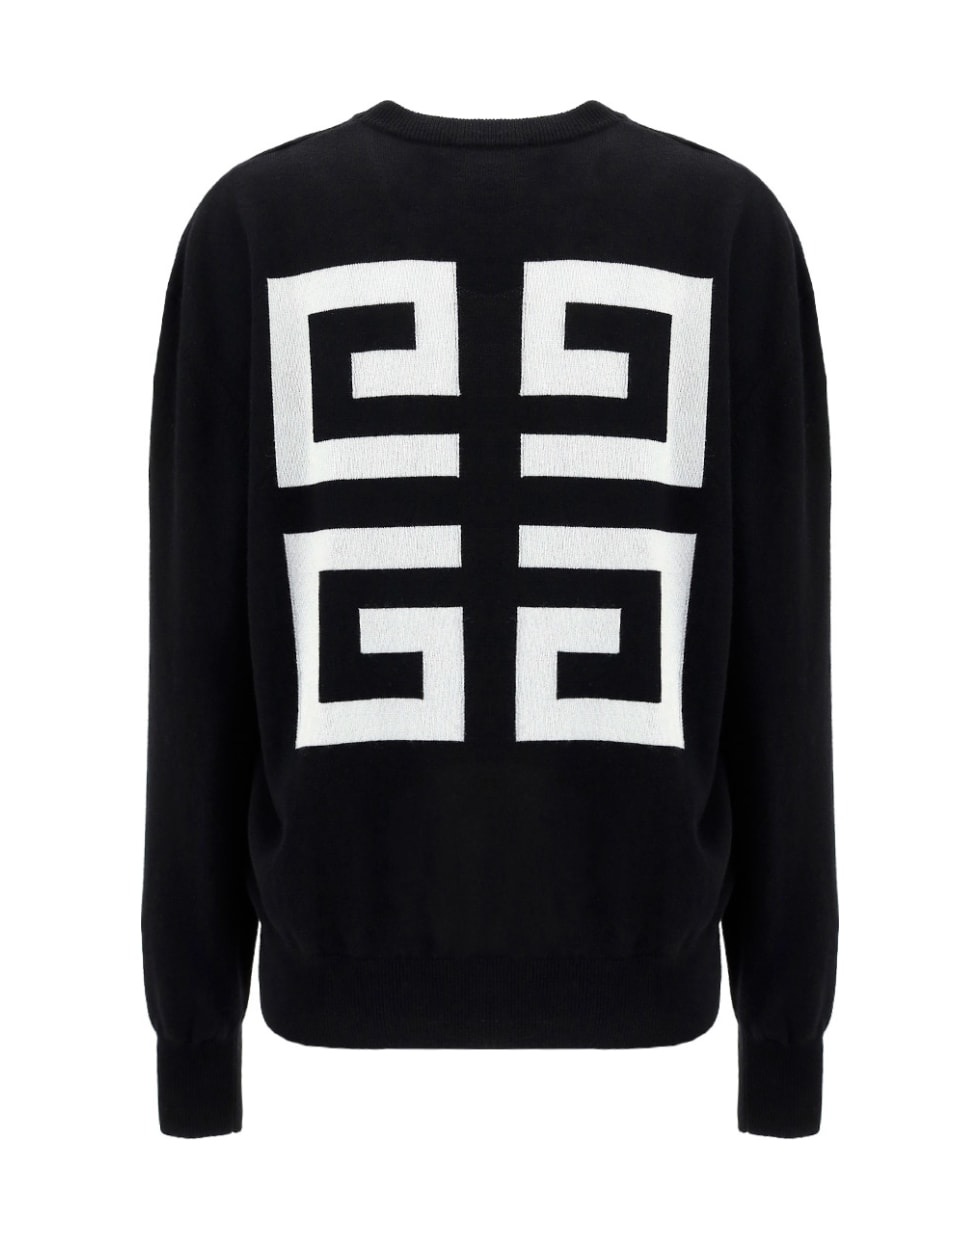 Givenchy Sweater - Black/white